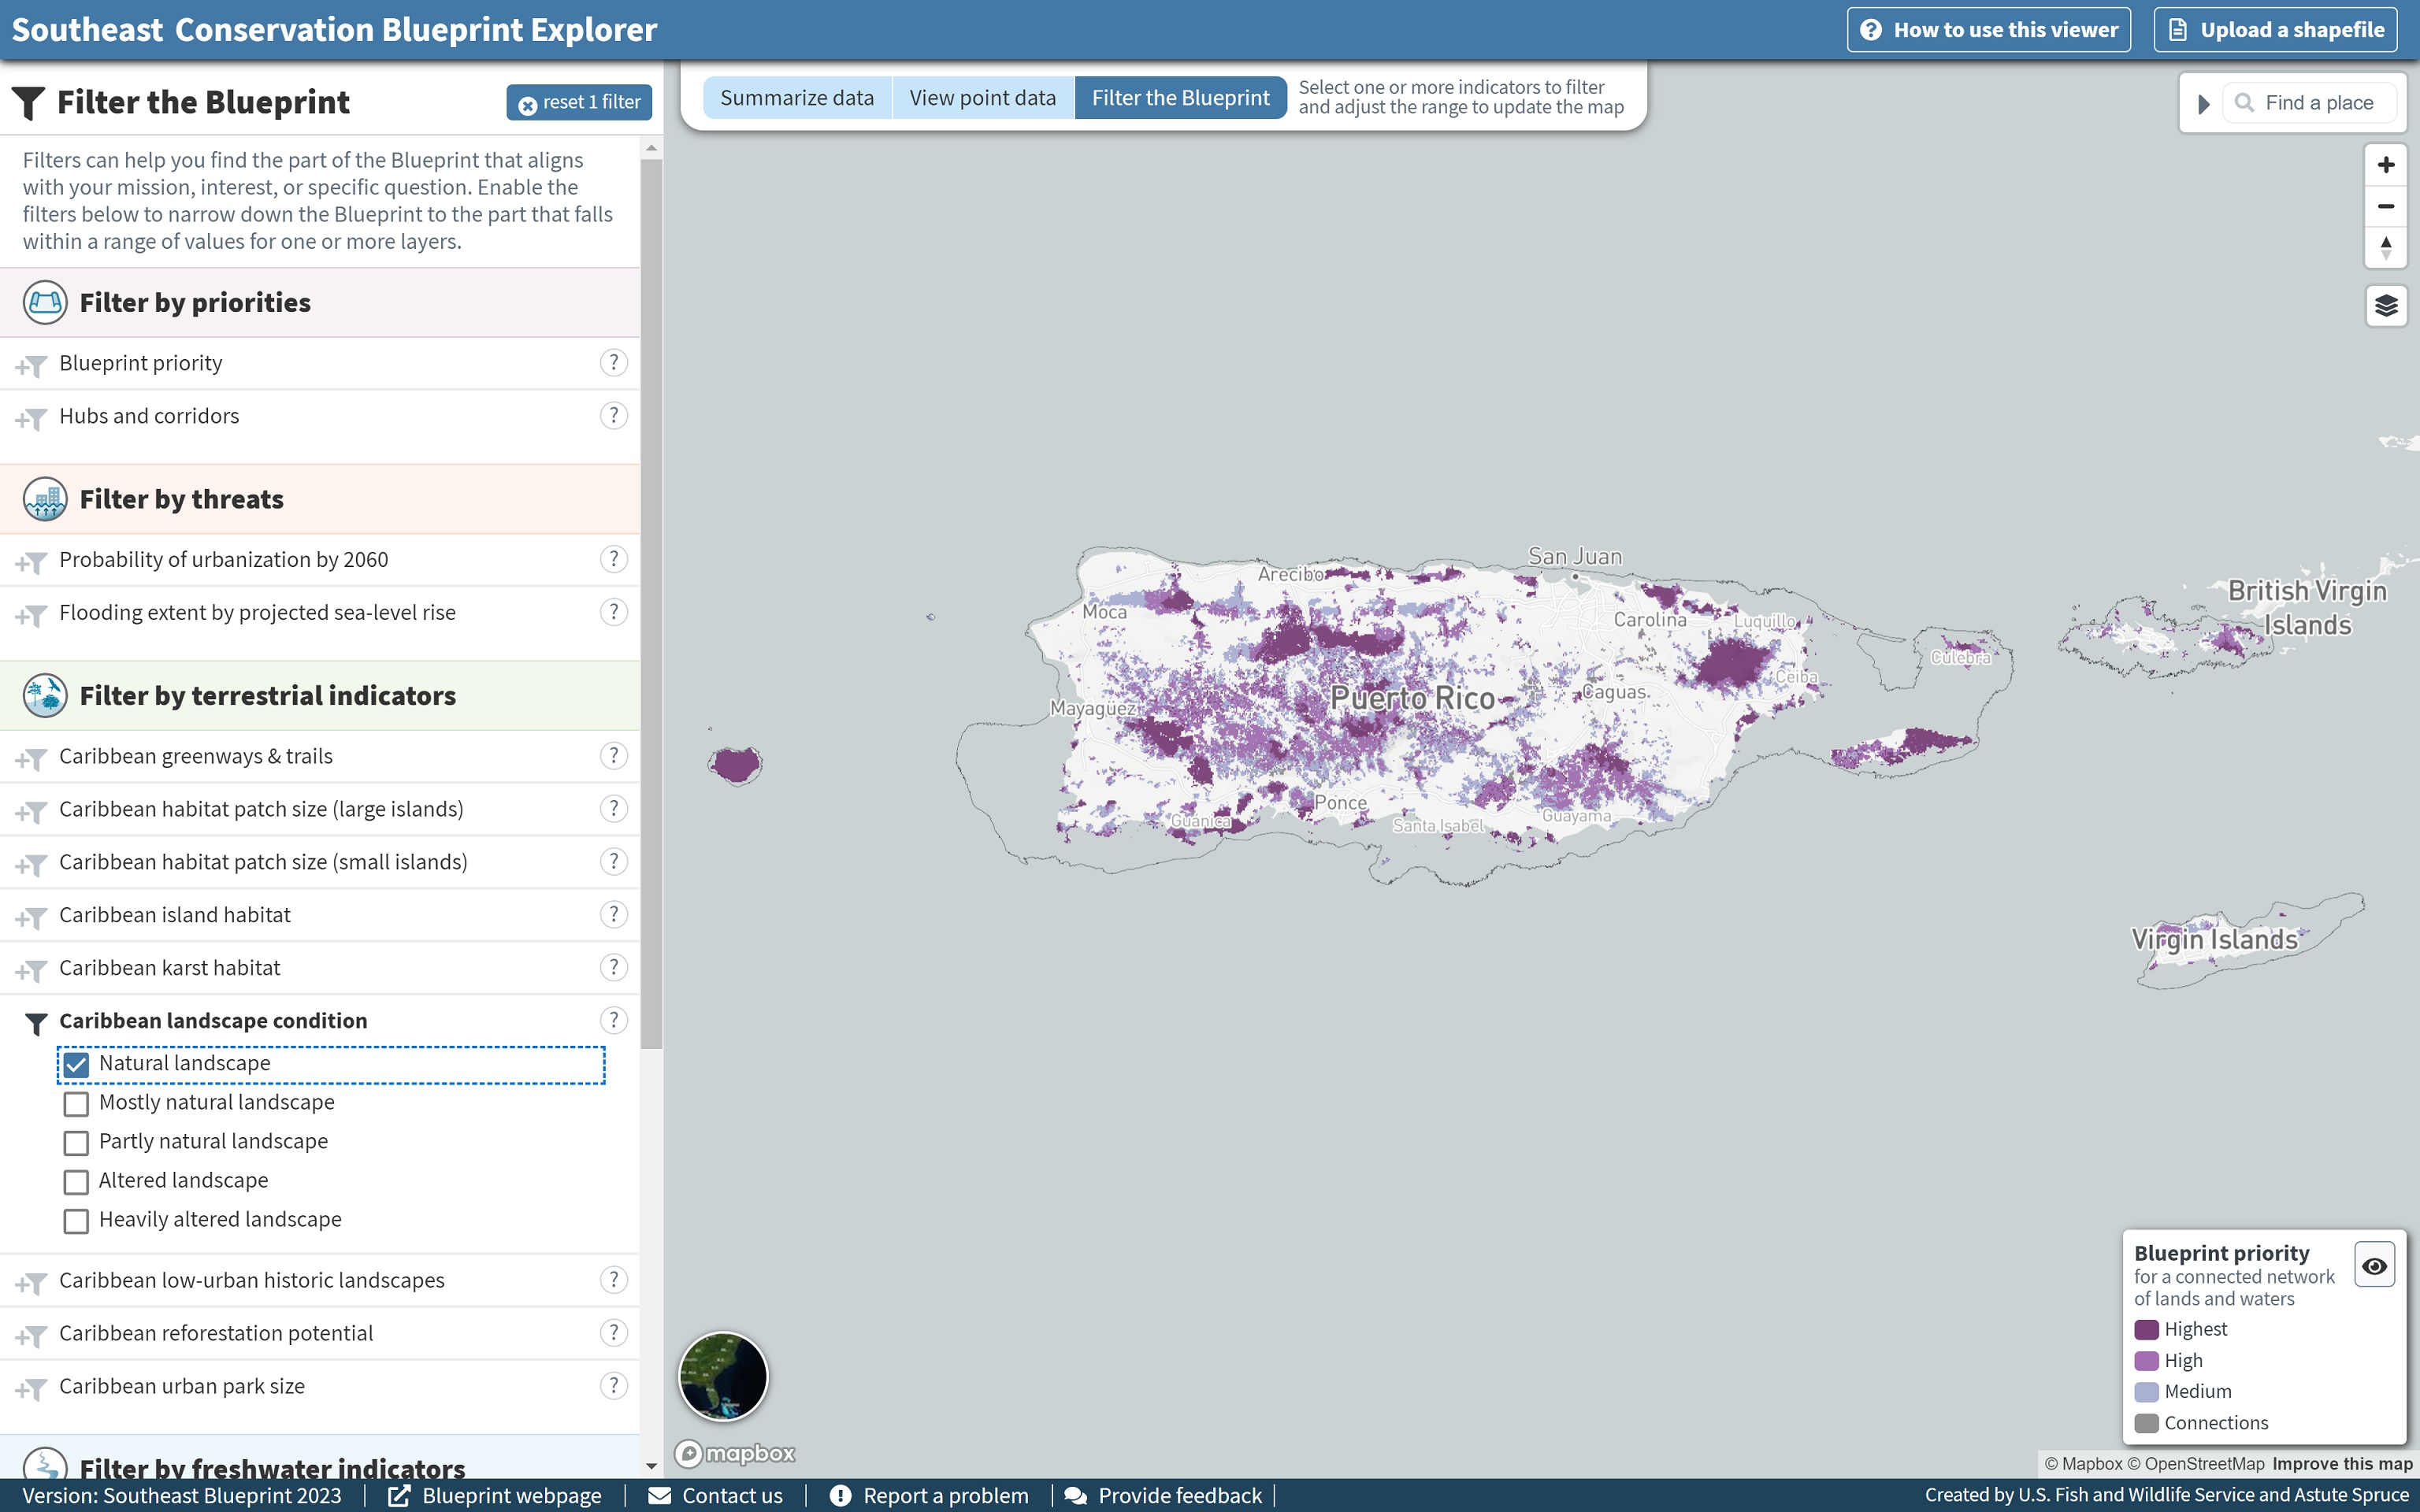 Screenshot of Explorer showing new filtering interaction, with the map zoomed into Puerto Rico and the U.S. Virign Islands, showing only the portion of the Blueprint that scores in the highest class of the Caribbean landscape condition indicator